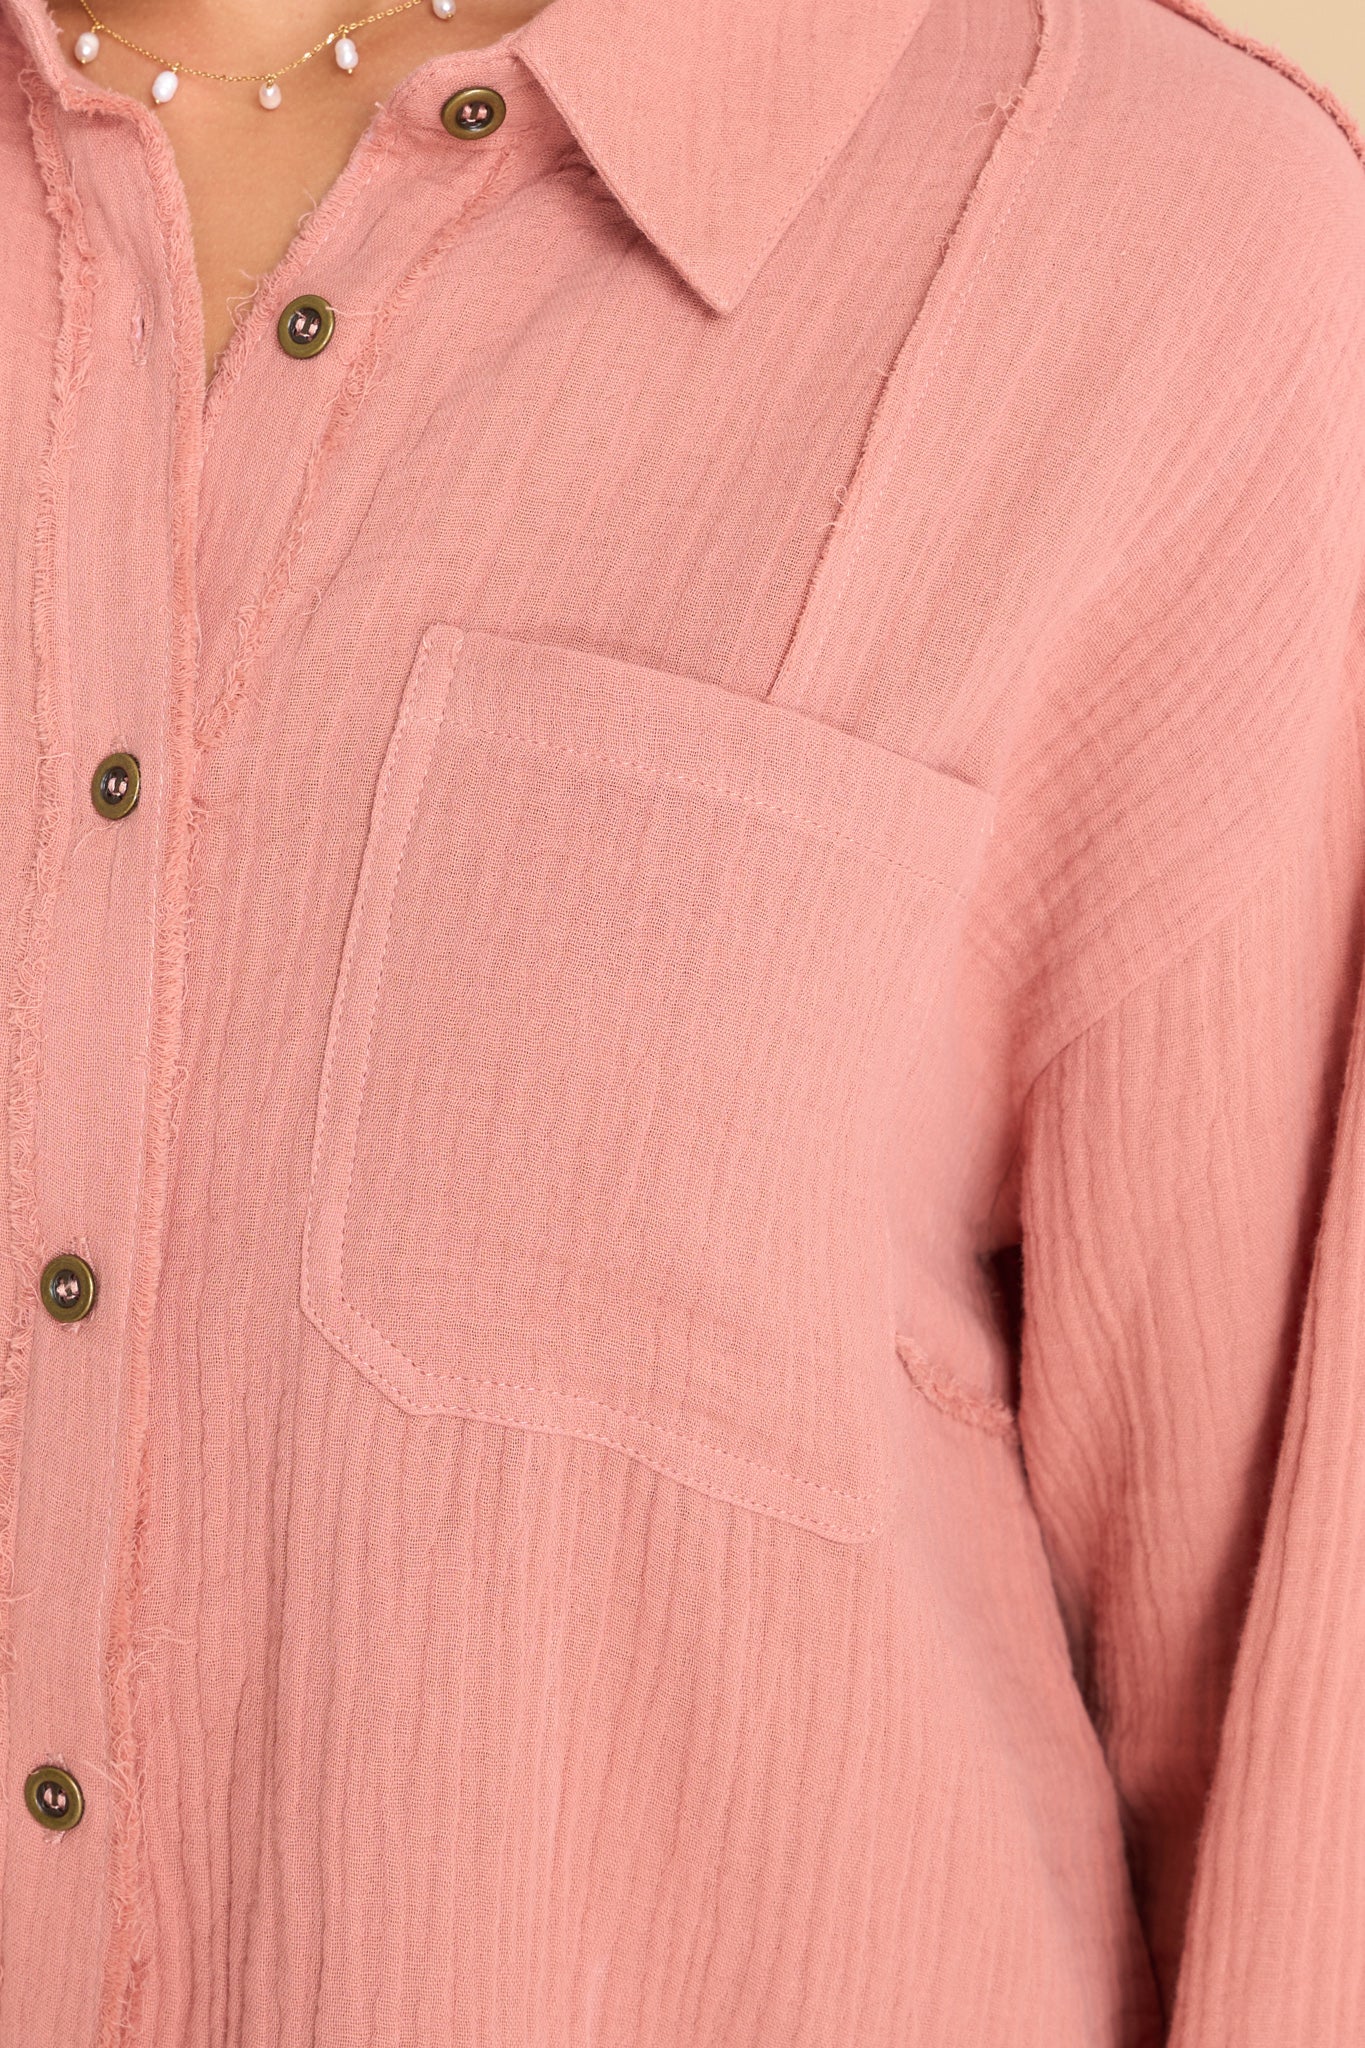 Close up view of this top that features a collared neckline, buttons down the front, and two pockets on the bust.